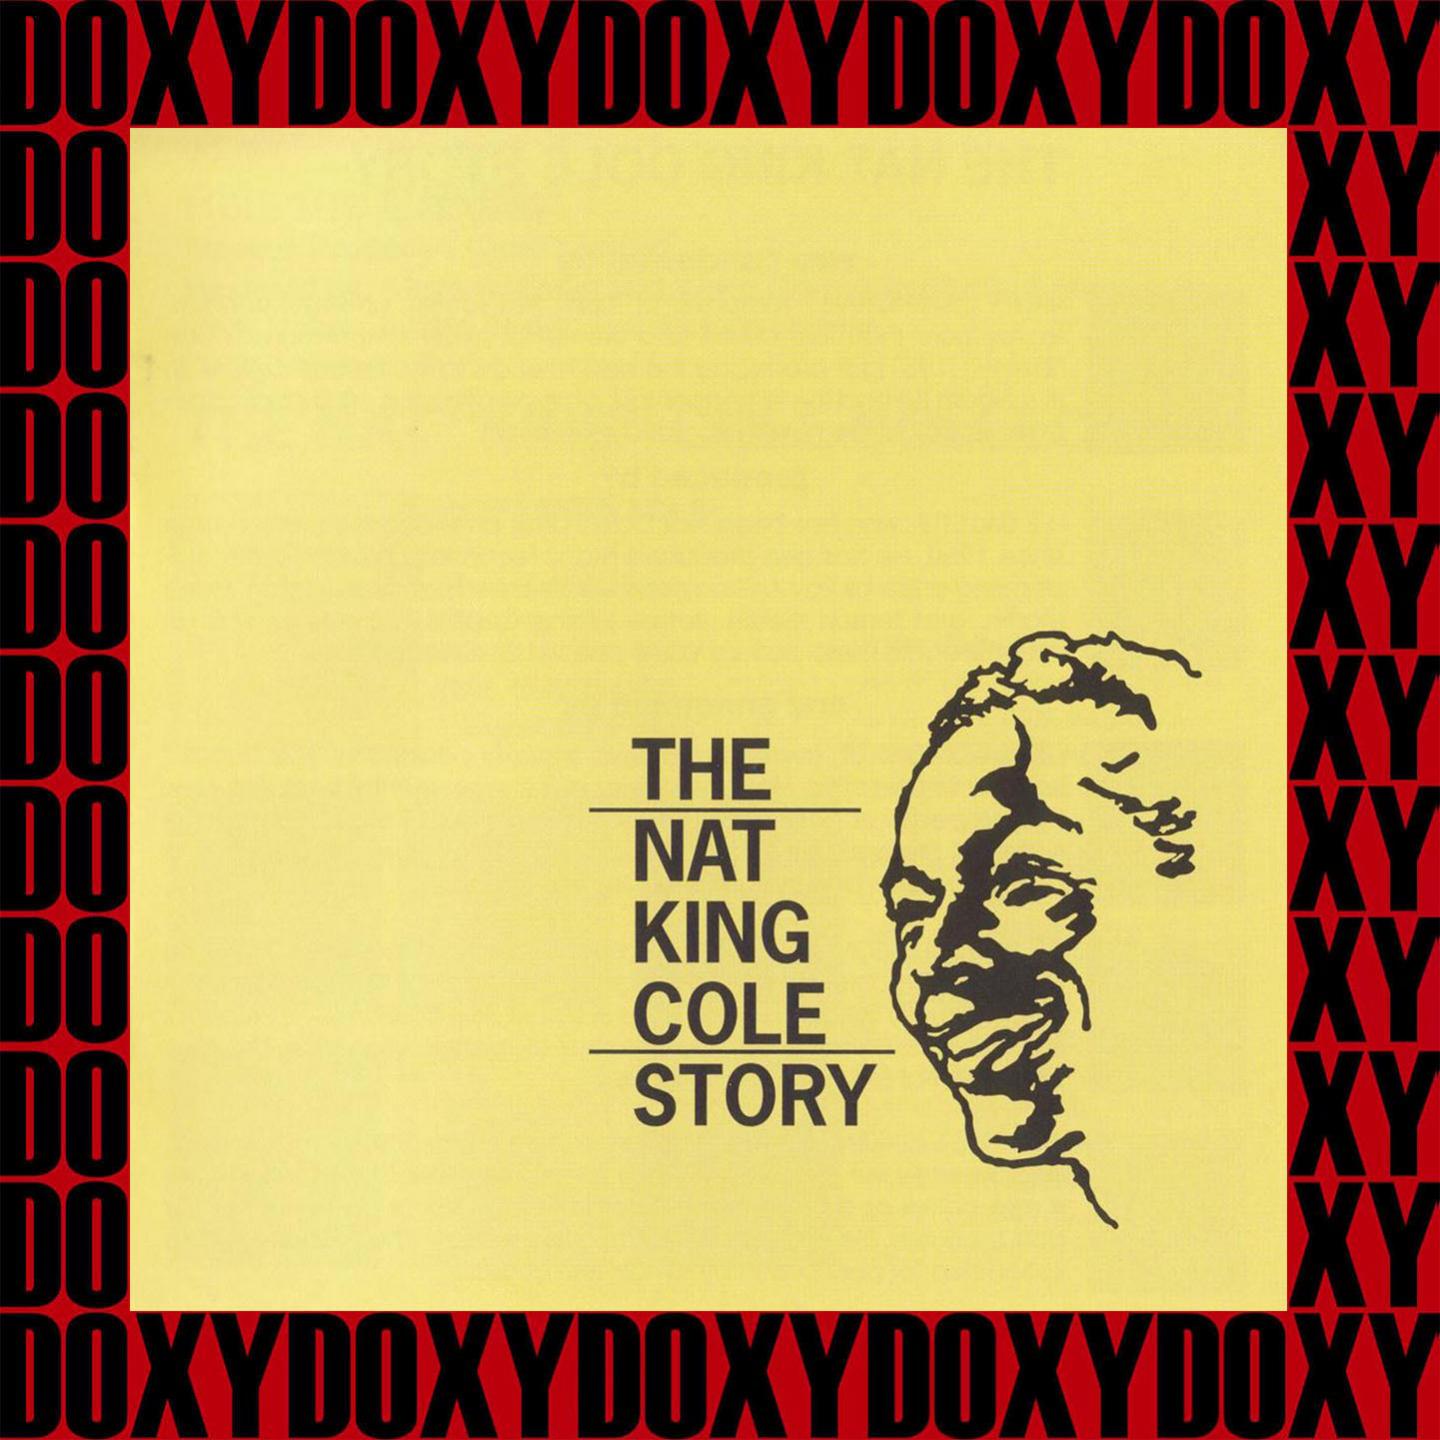 The Nat King Cole Story (Remastered Version) (Doxy Collection)